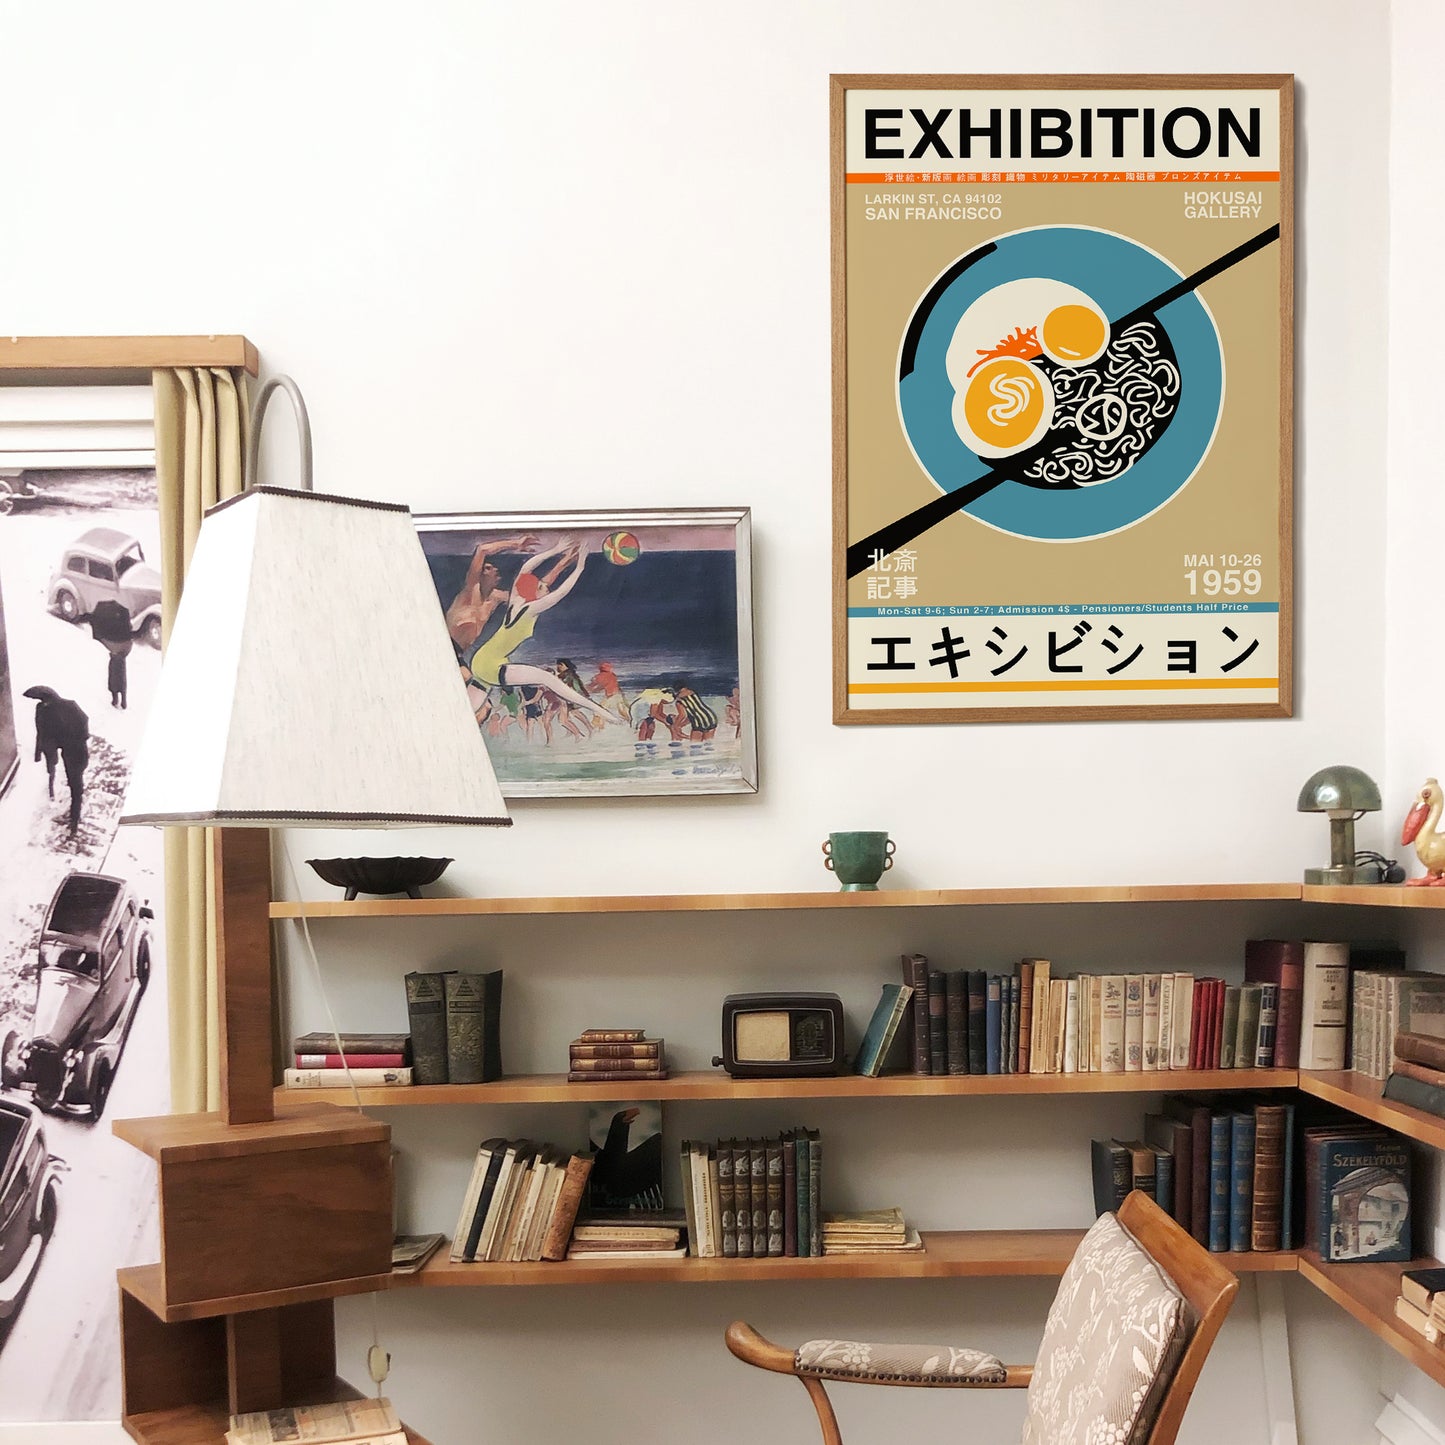 Japanese Exhibition 1959 Poster